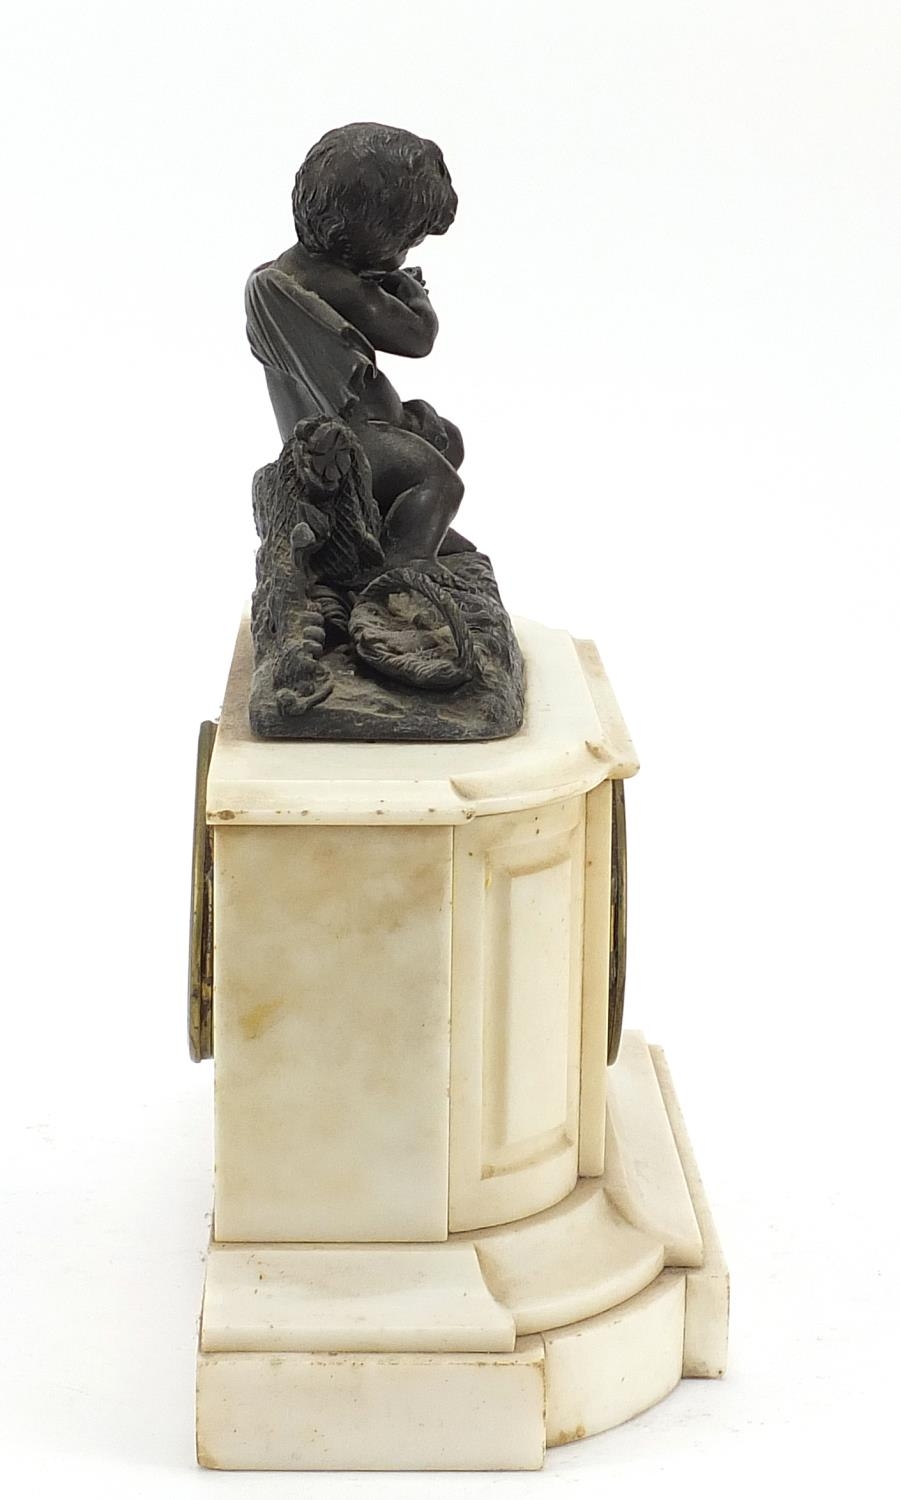 19th century French white marble mantle clock striking on a bell, surmounted with a bronzed figure - Image 16 of 16